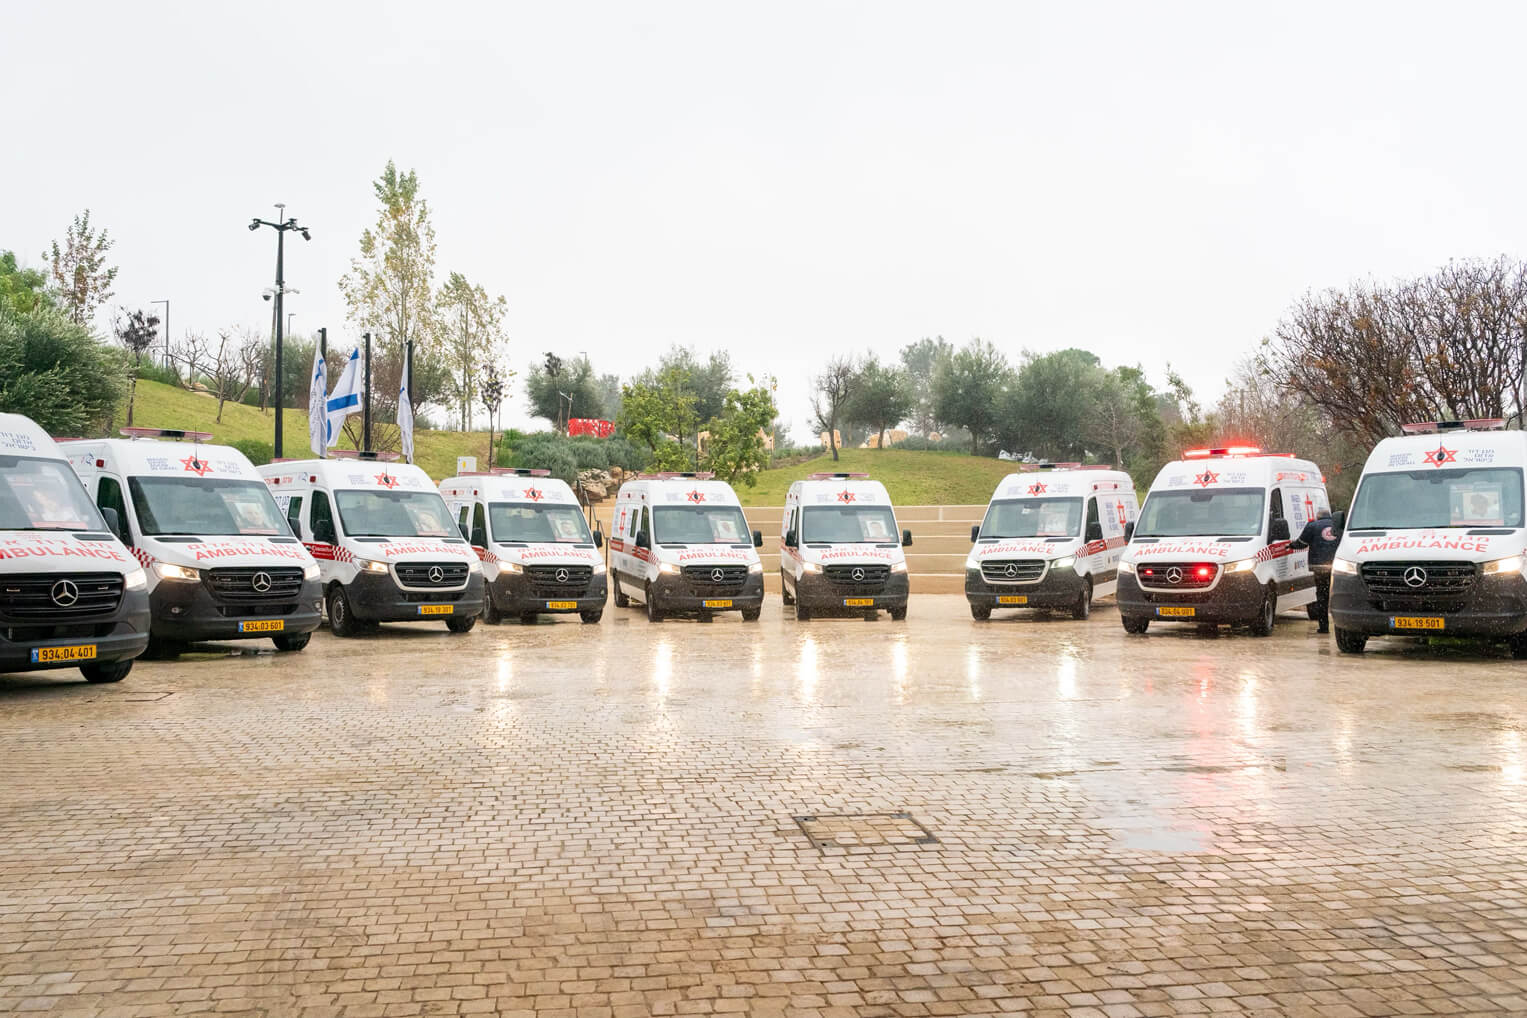 The 14 ambulances, uparmored to defend against Hamas attacks, will help protect Magen David Adom members as they render aid to the wounded.